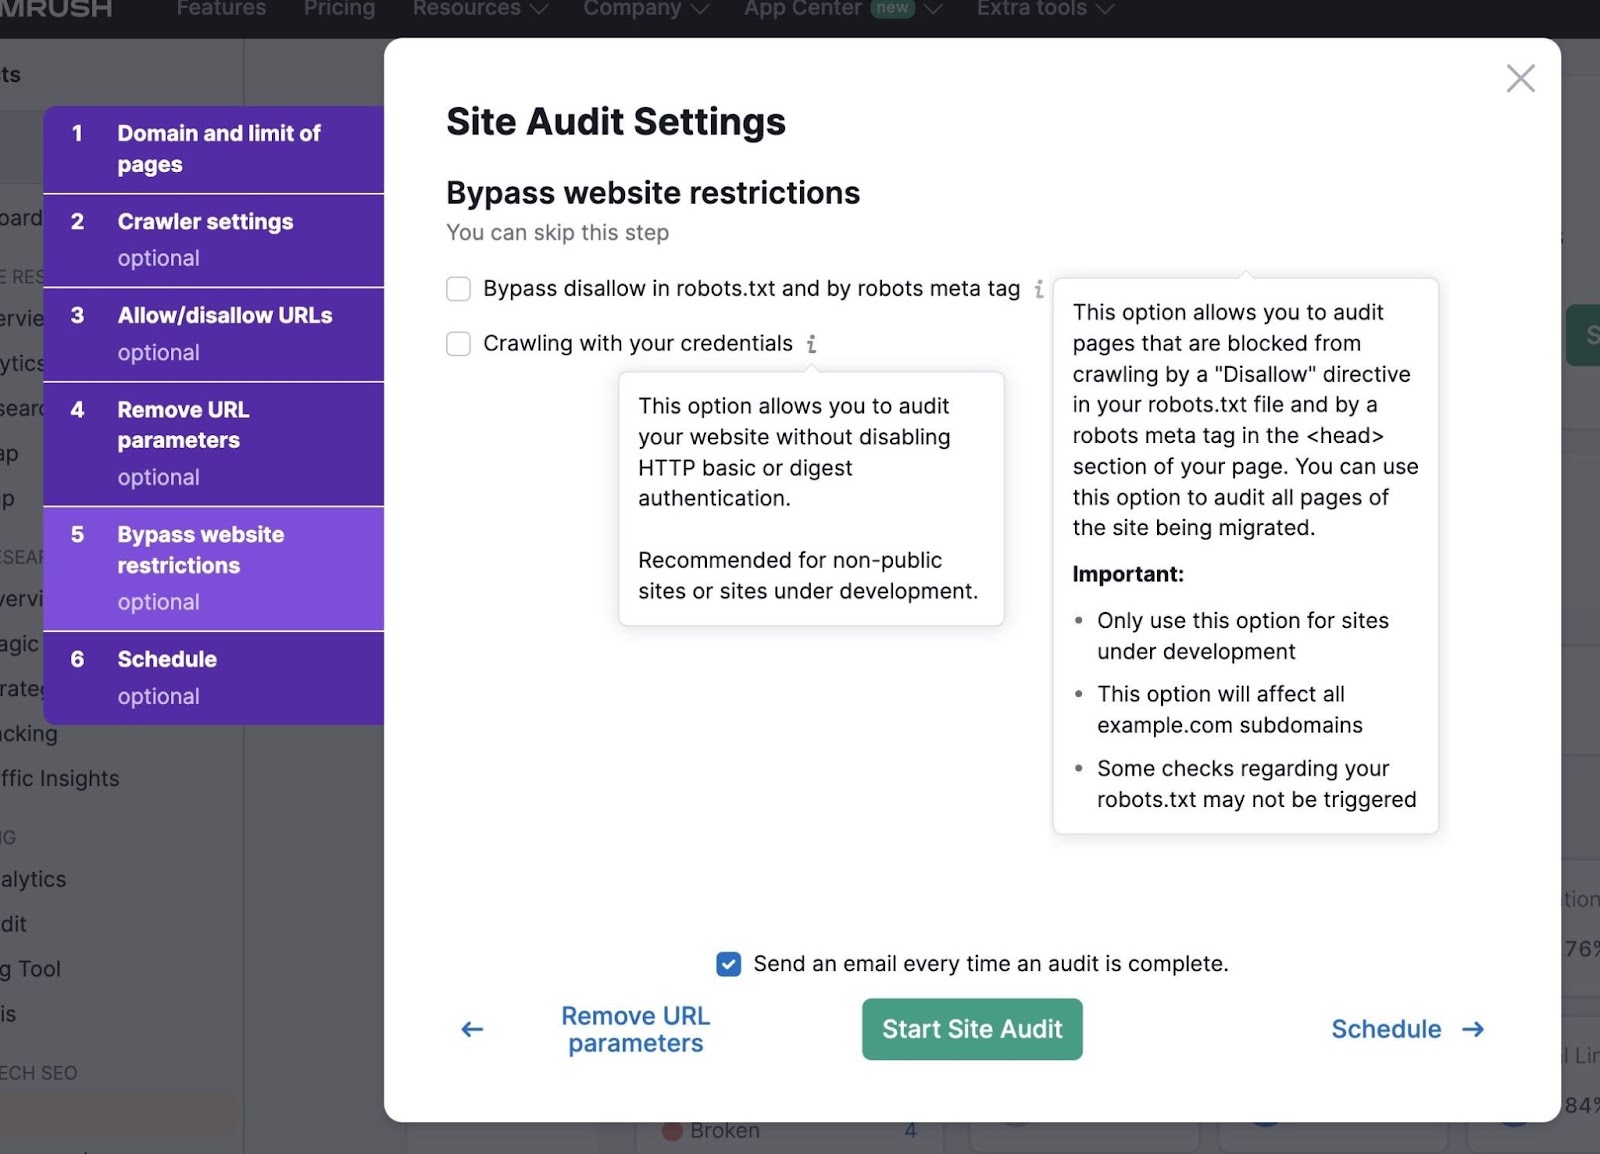 Bypass website restrictions settings page on Site Audit to bypass disallow in robots.text or crawl with your credentials.